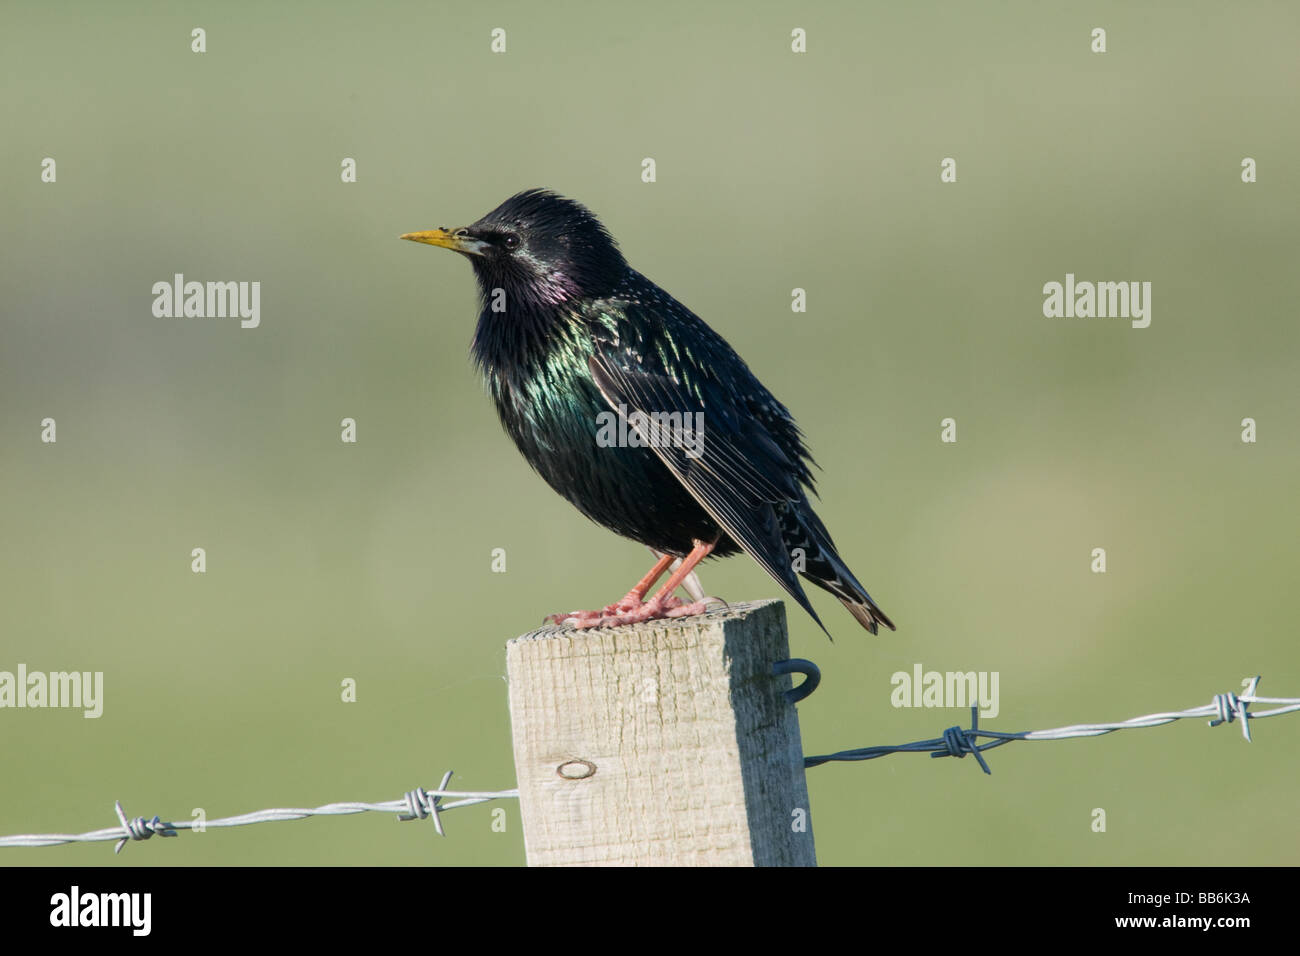 Starling standing on a post in May, North Uist, Western Isles, Scotland Stock Photo